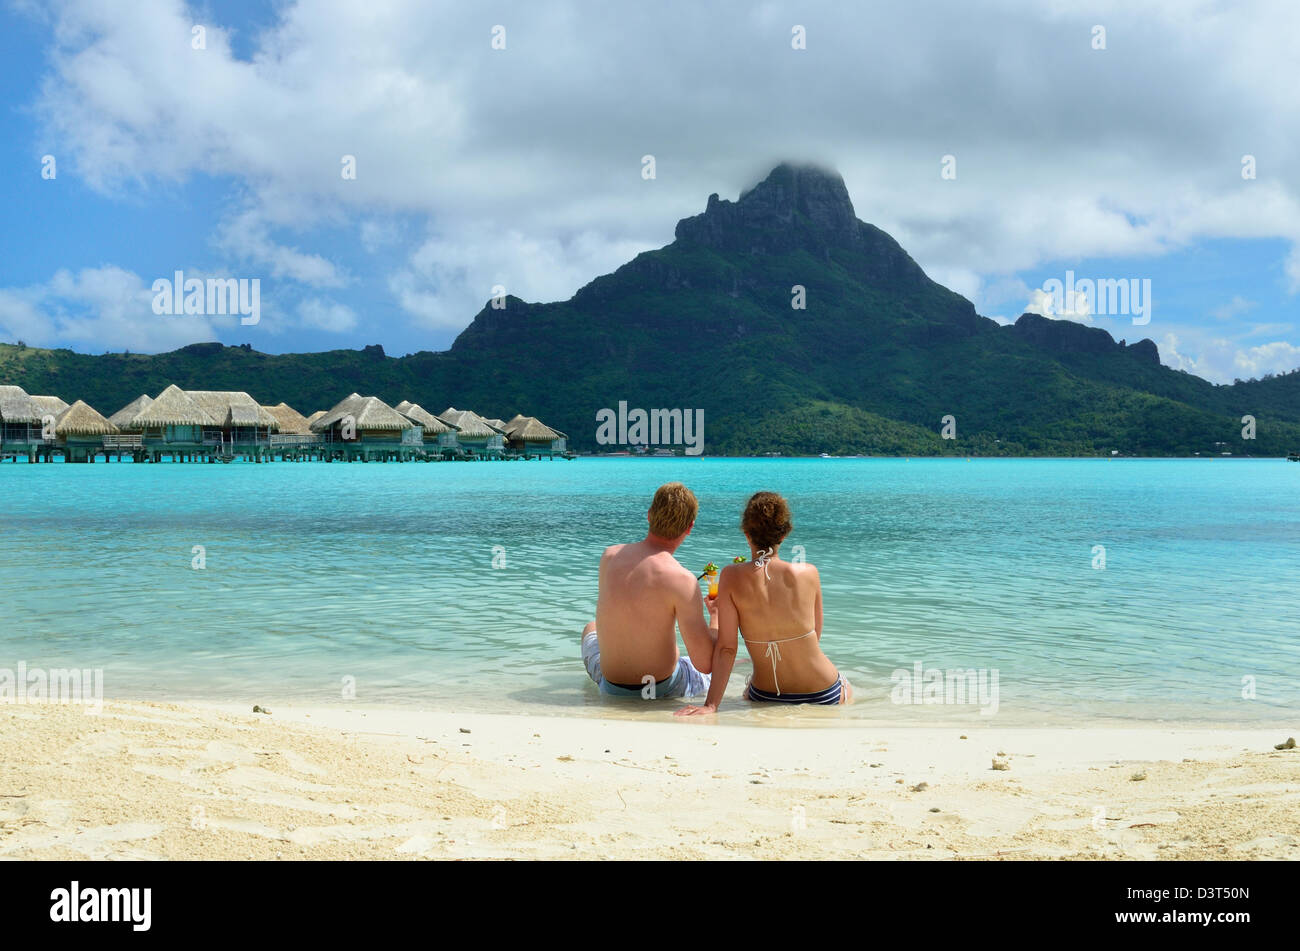 A honeymoon couple drinking a cocktail on the beach of a luxury vacation resort in the lagoon with a view on a tropical island. Stock Photo